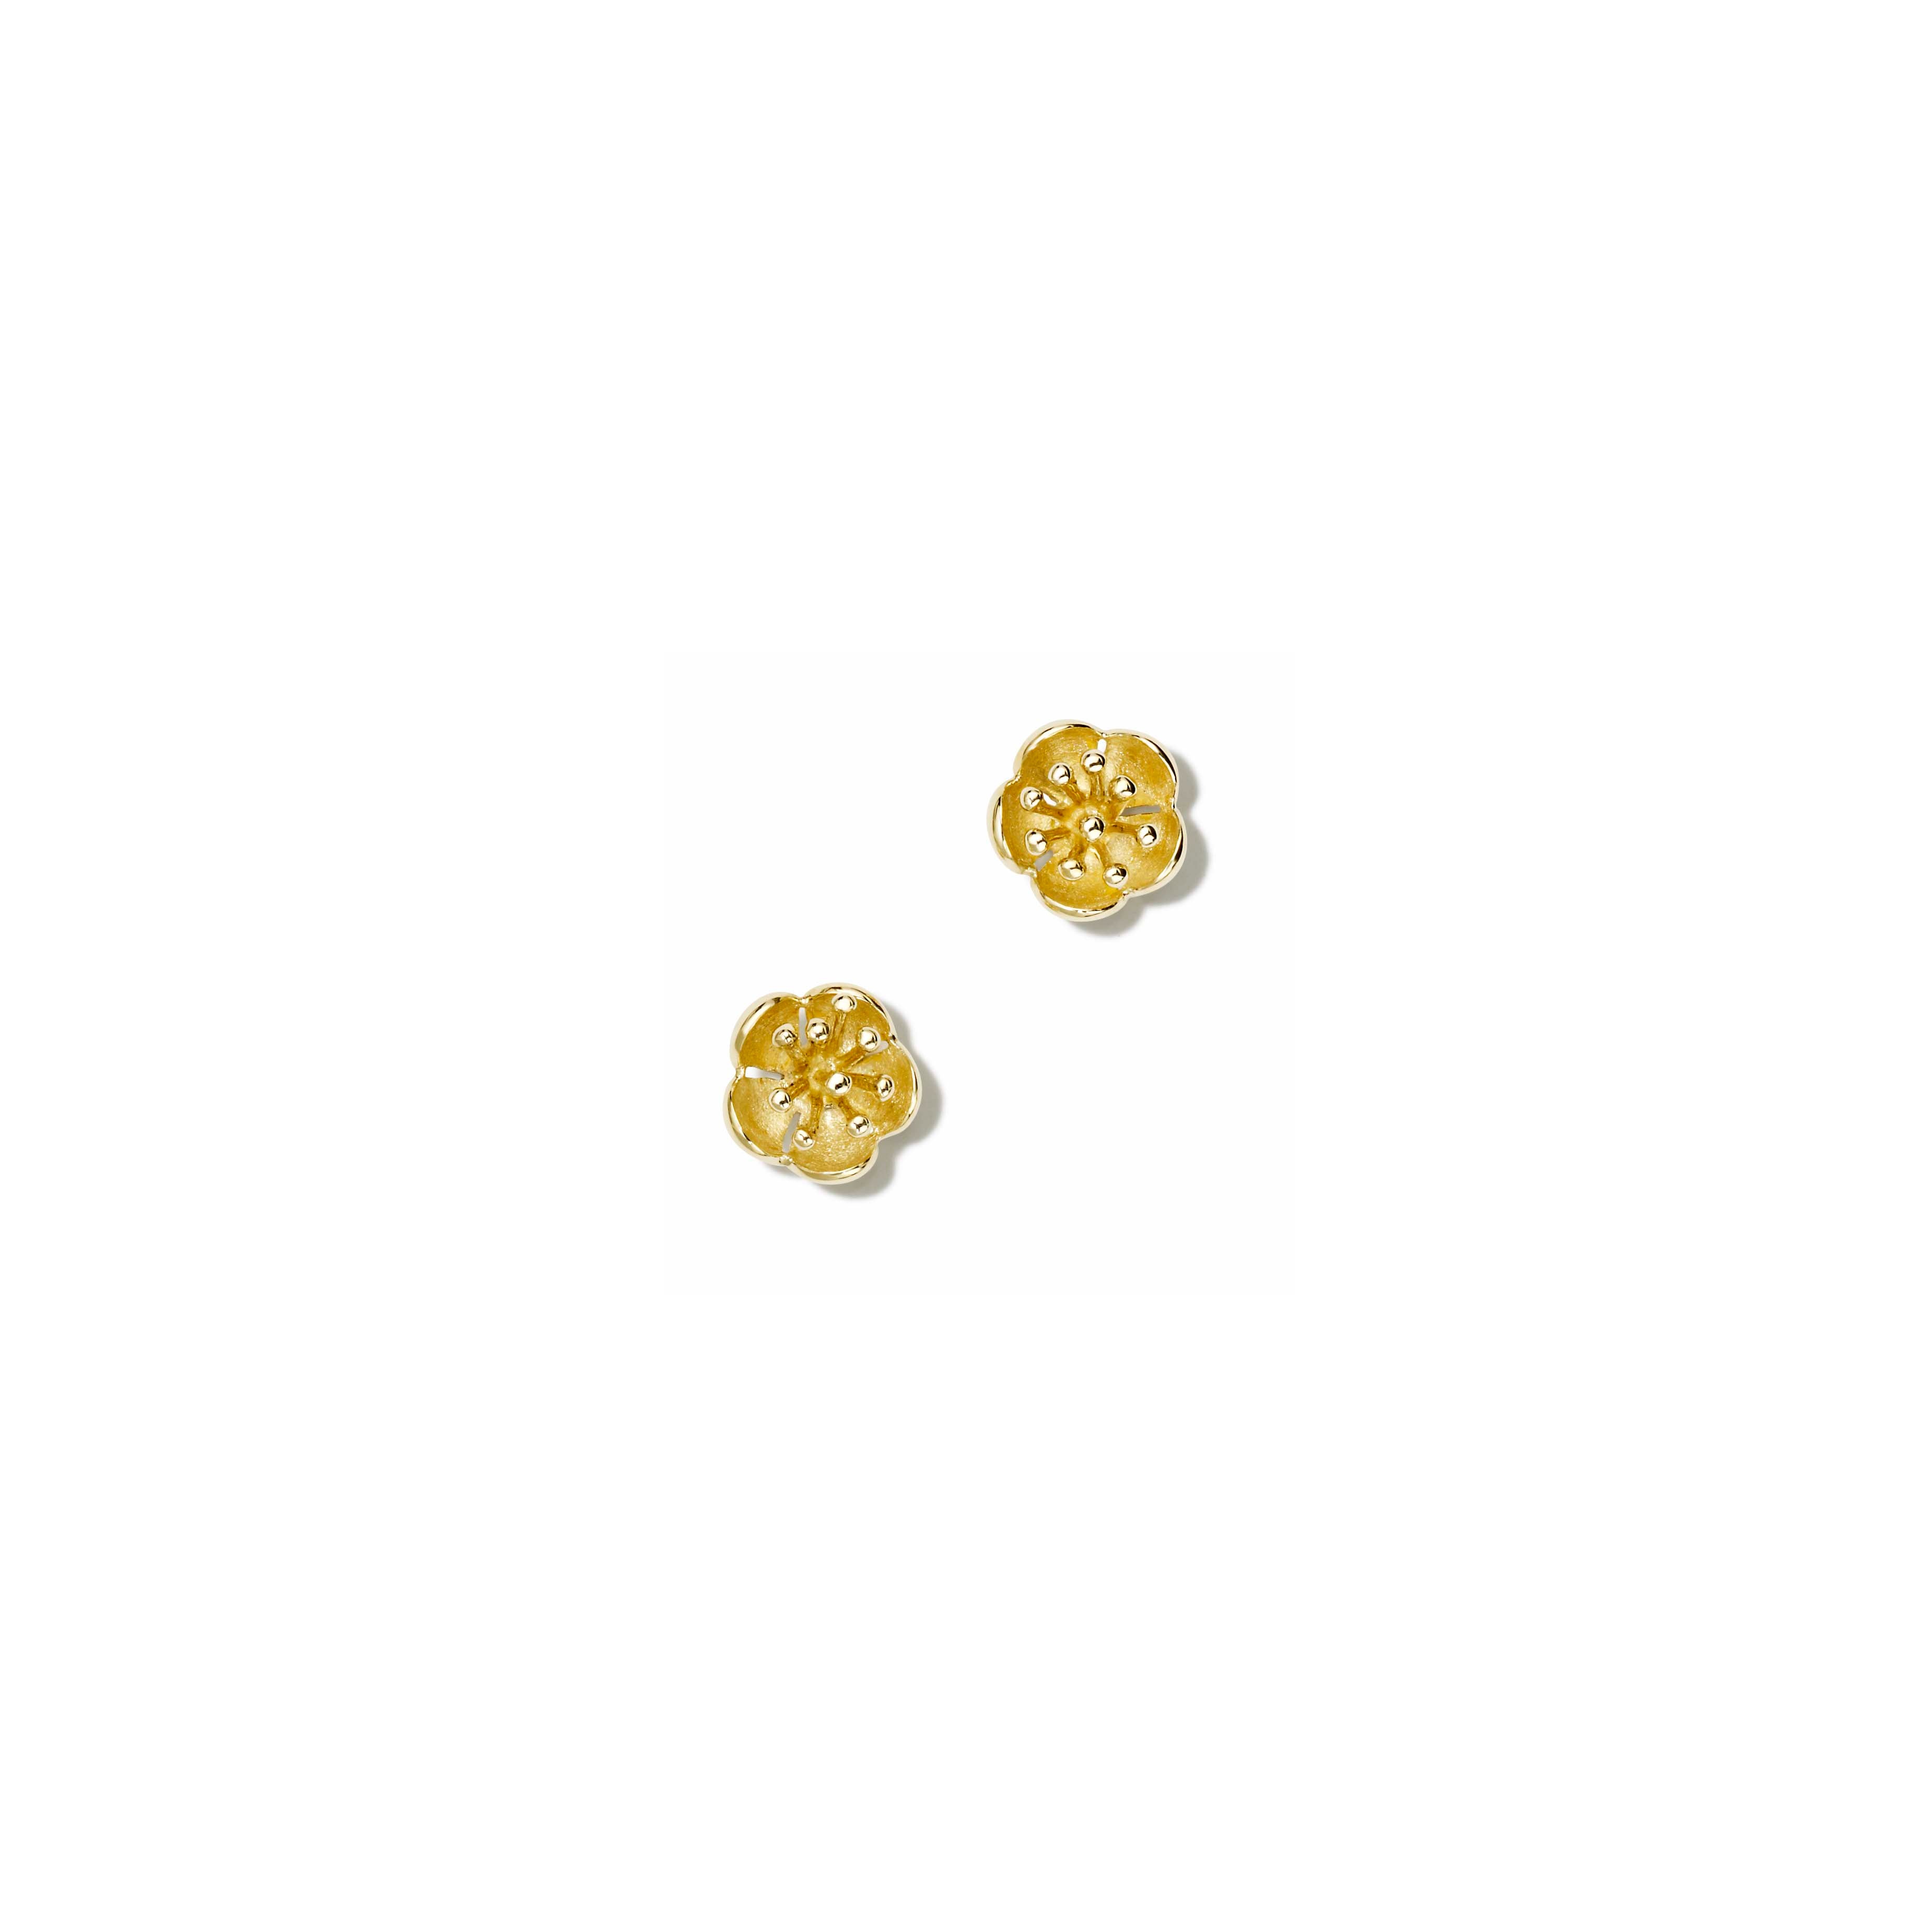 Plum Blossom Small Earrings Yellow Gold